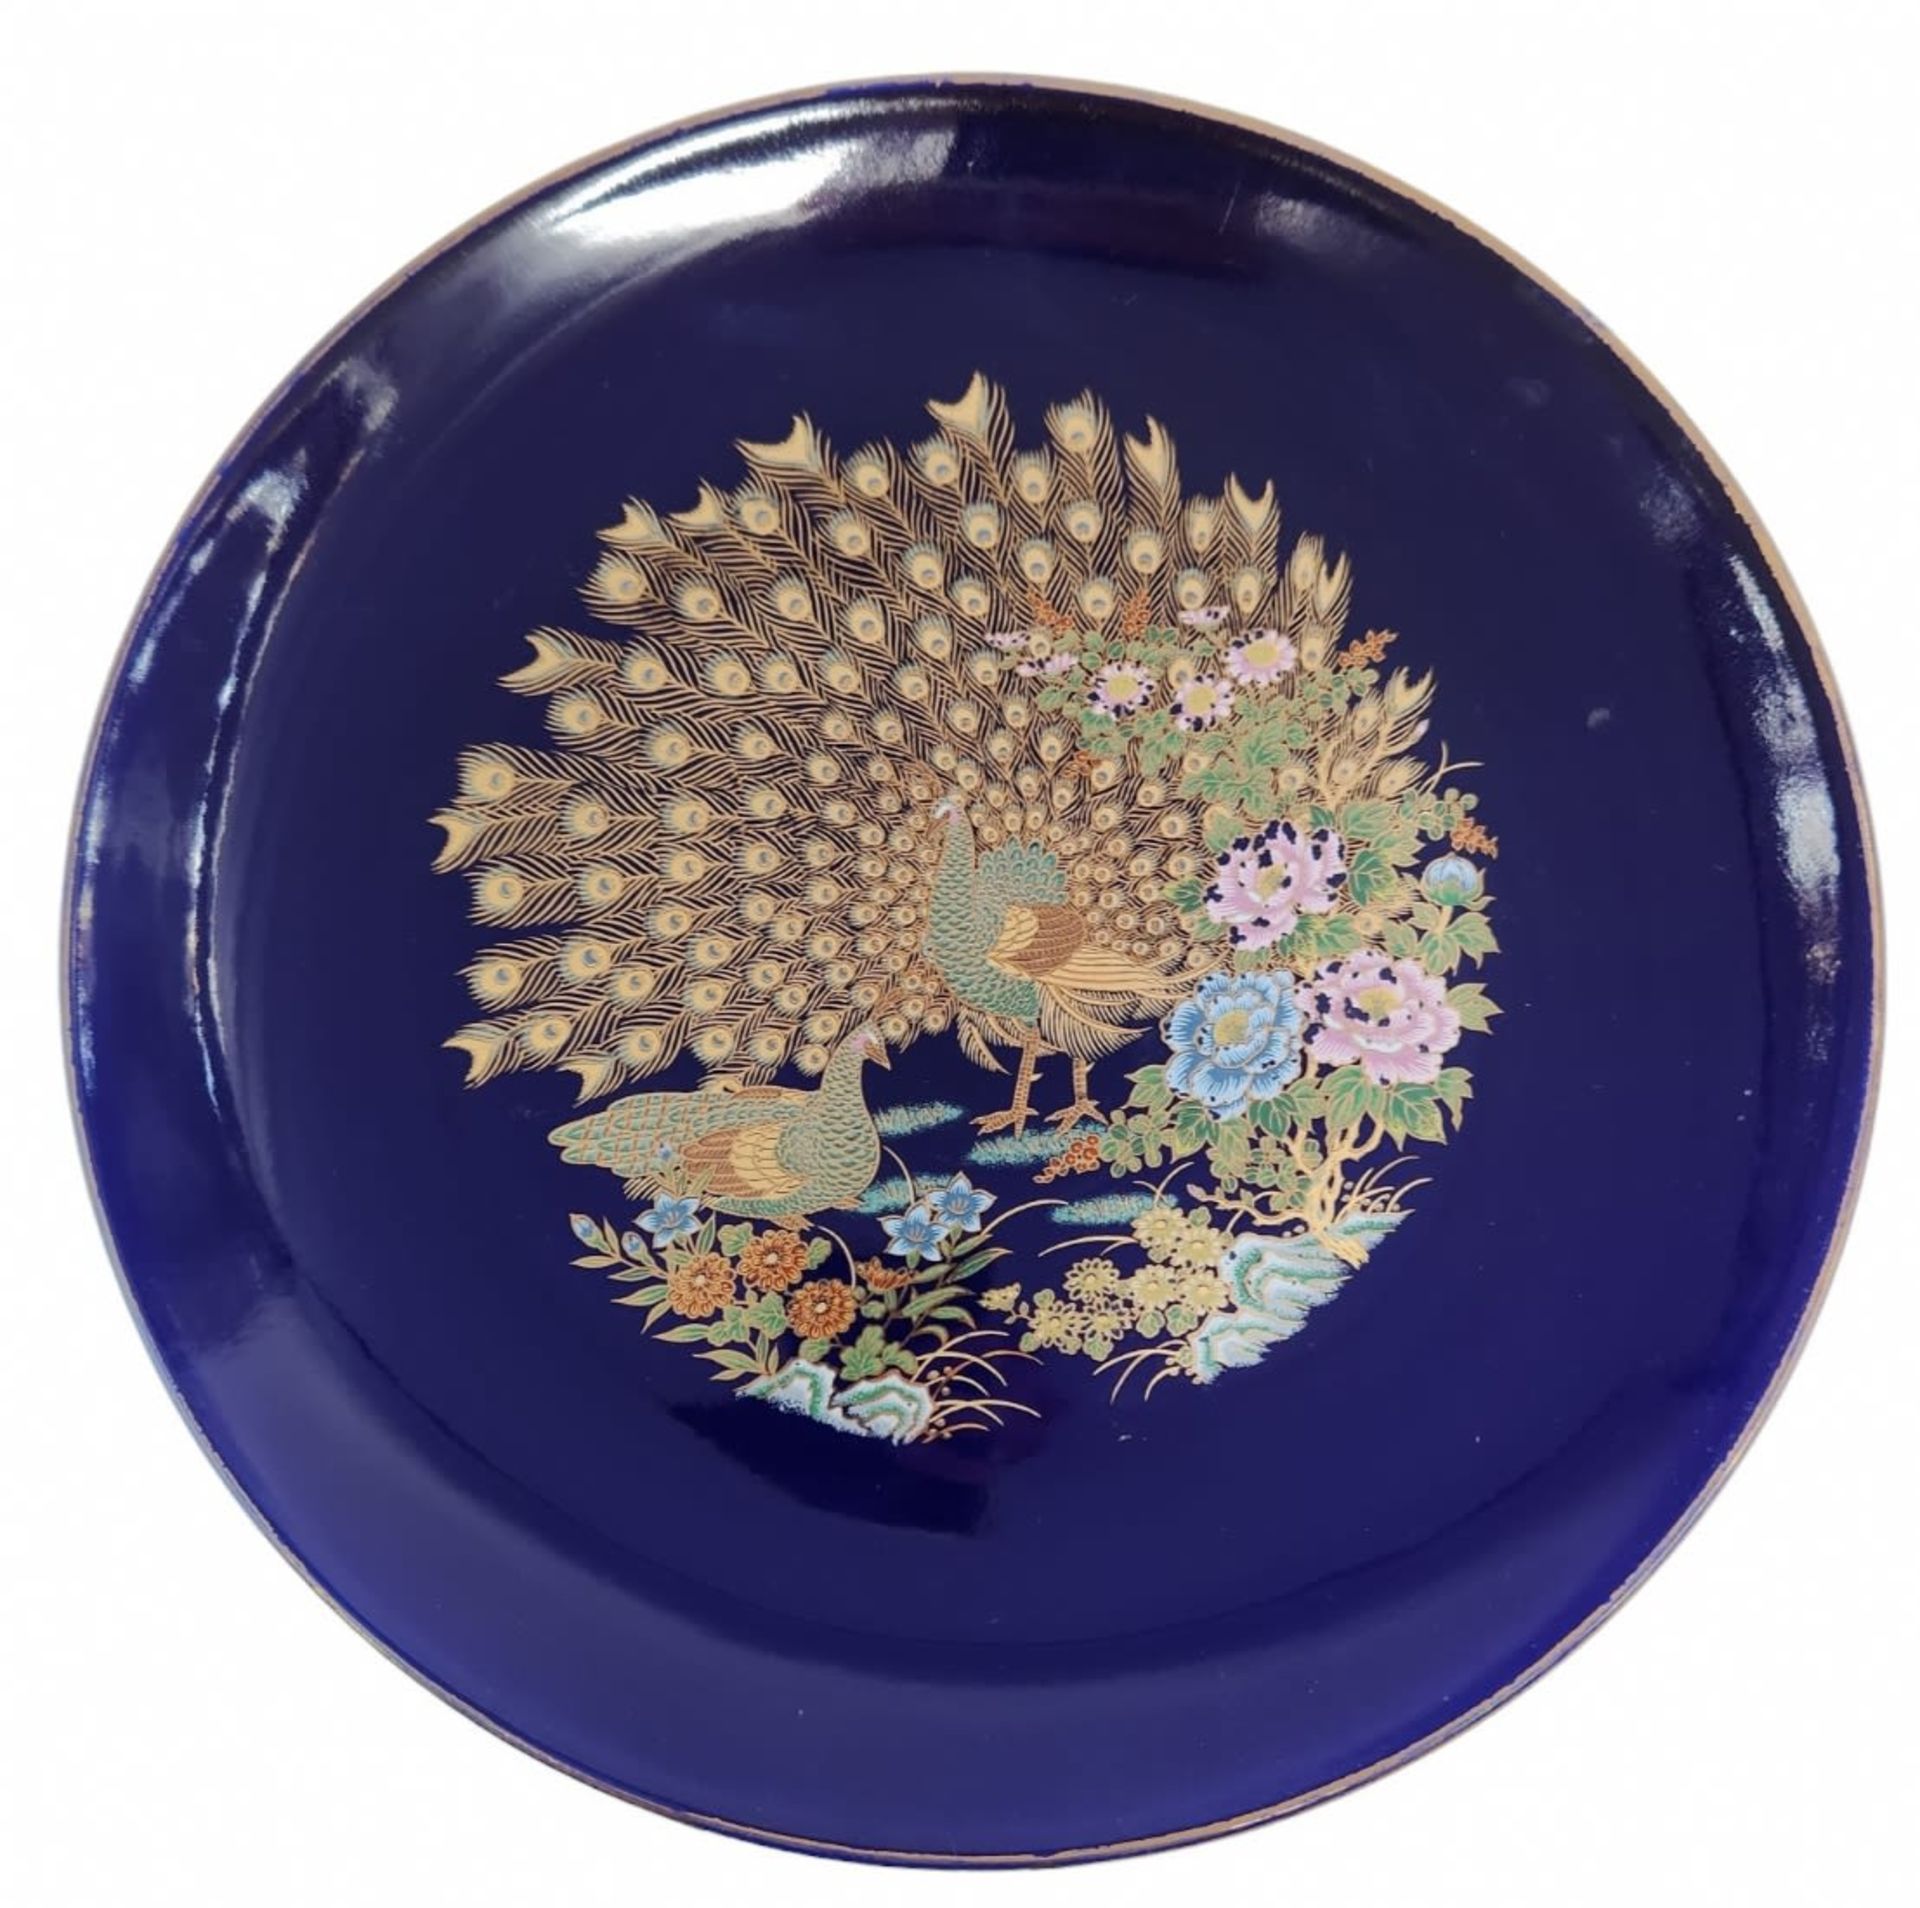 Round Japanese porcelain plate, decorated with a peacock pattern on a cobalt blue background. - Image 2 of 2